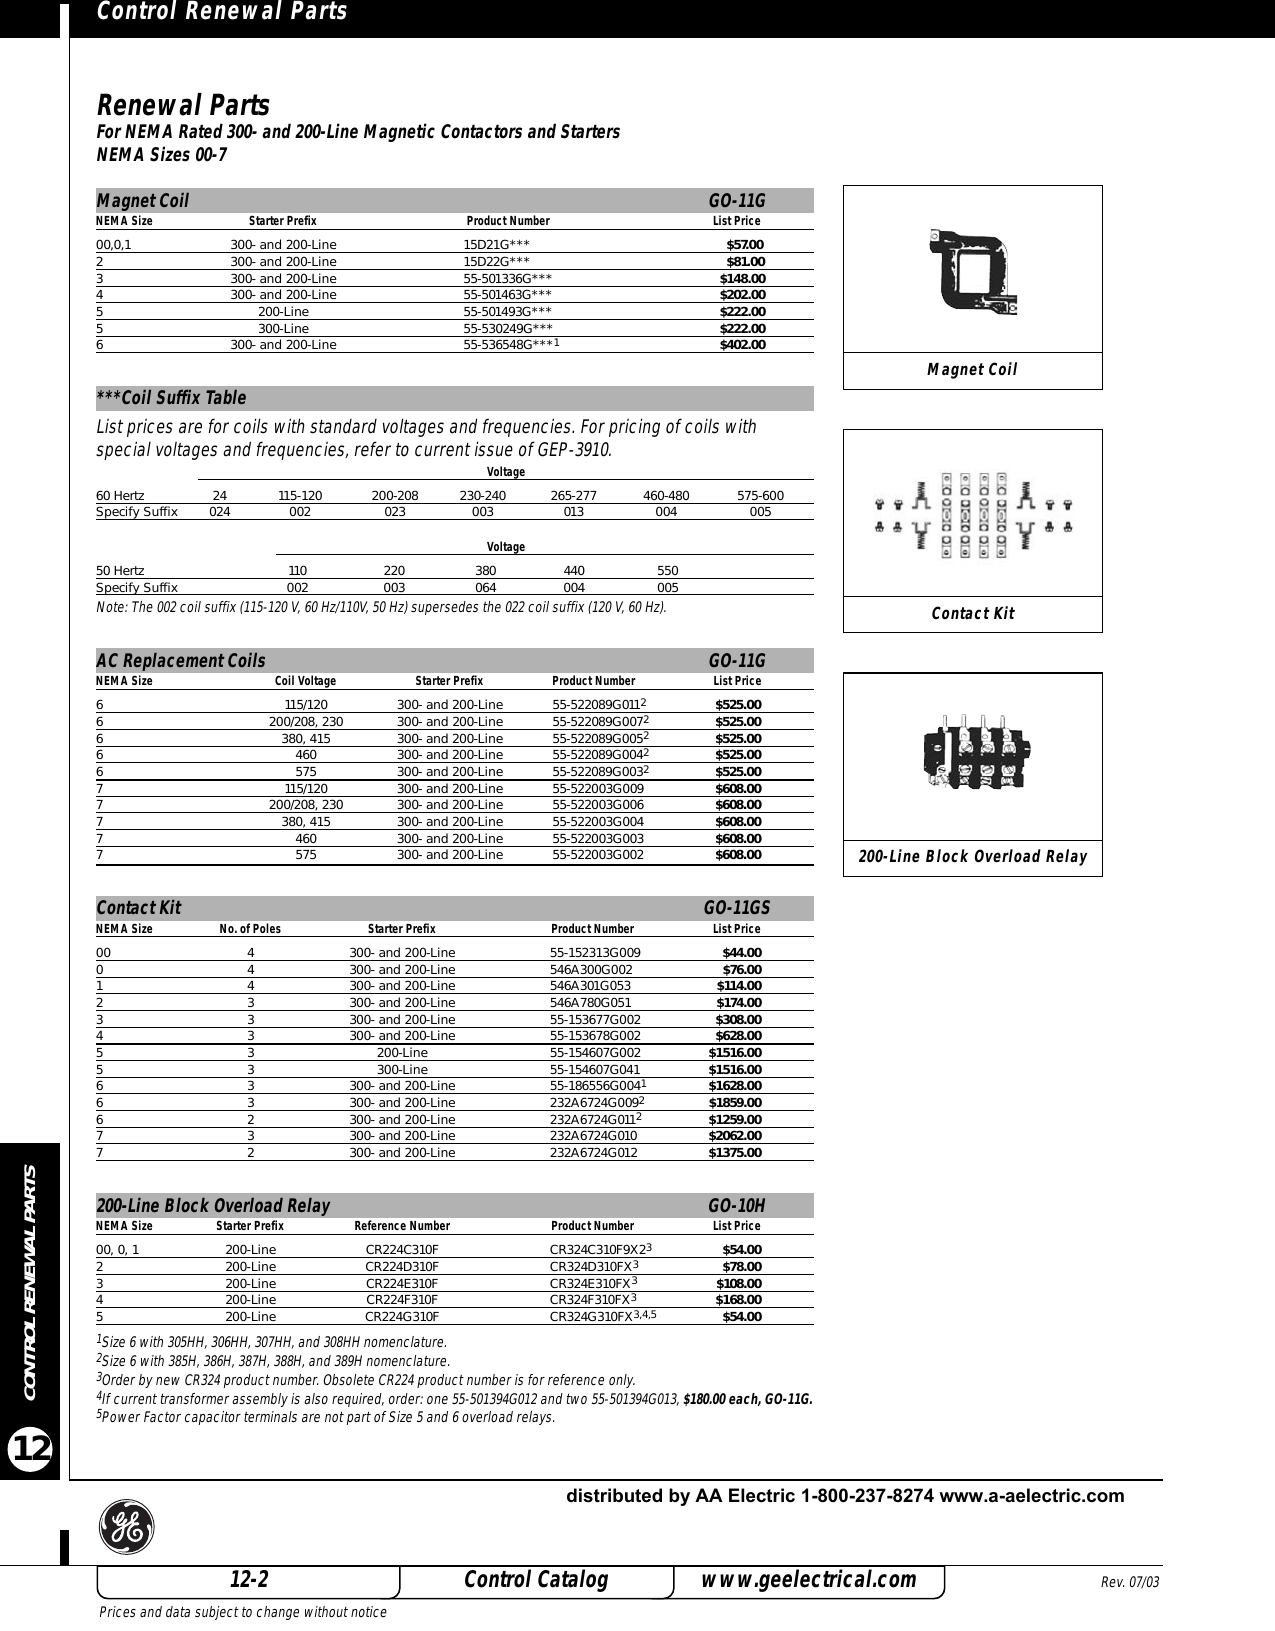 Page 2 of 8 - GE 2005 Control Catalog - Section 12  522426-Catalog